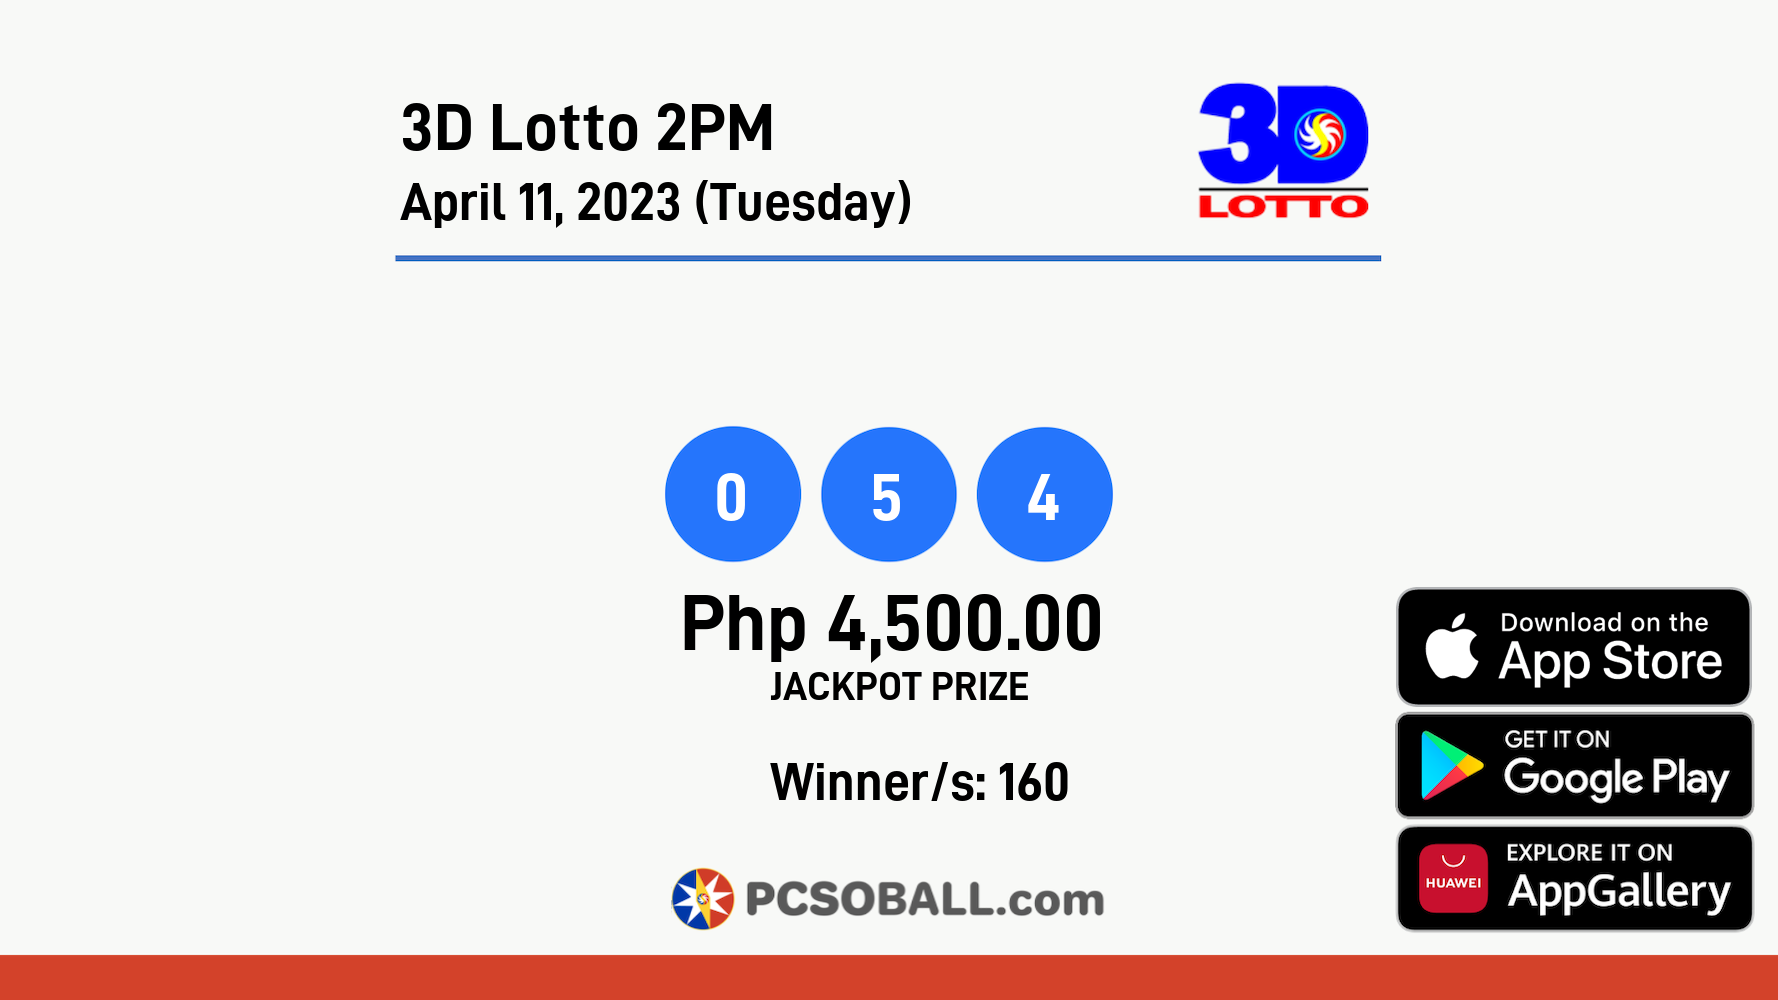 3D Lotto 2PM April 11, 2023 (Tuesday) Result